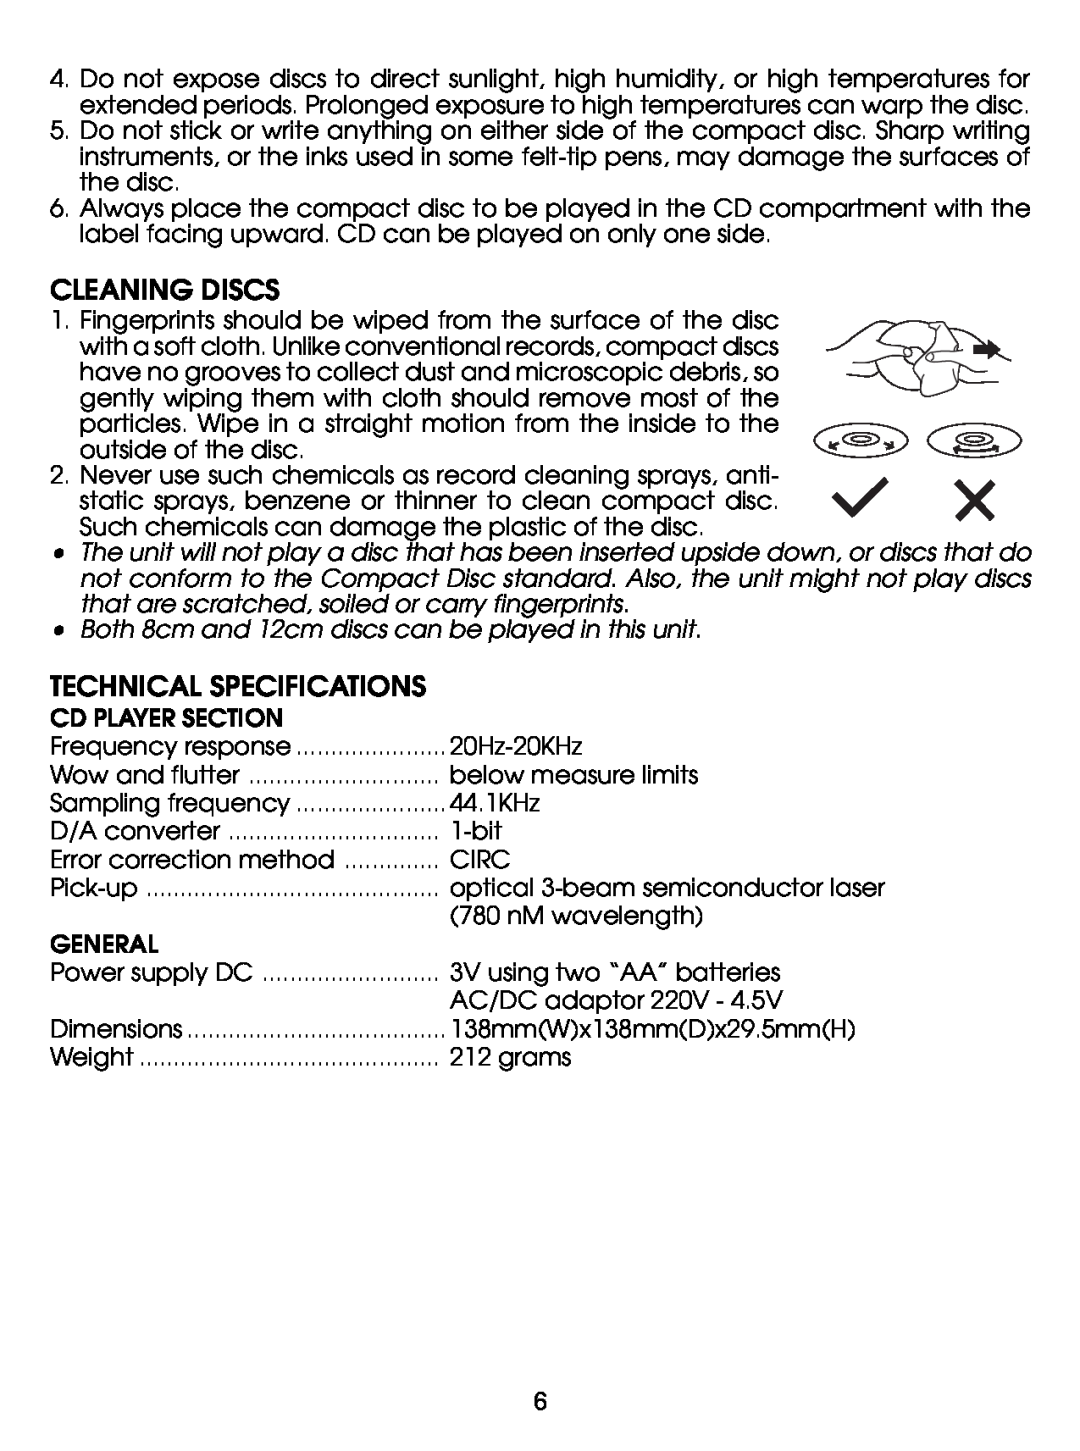 Jwin JX-CD280 instruction manual Cleaning Discs, Technical Specifications 